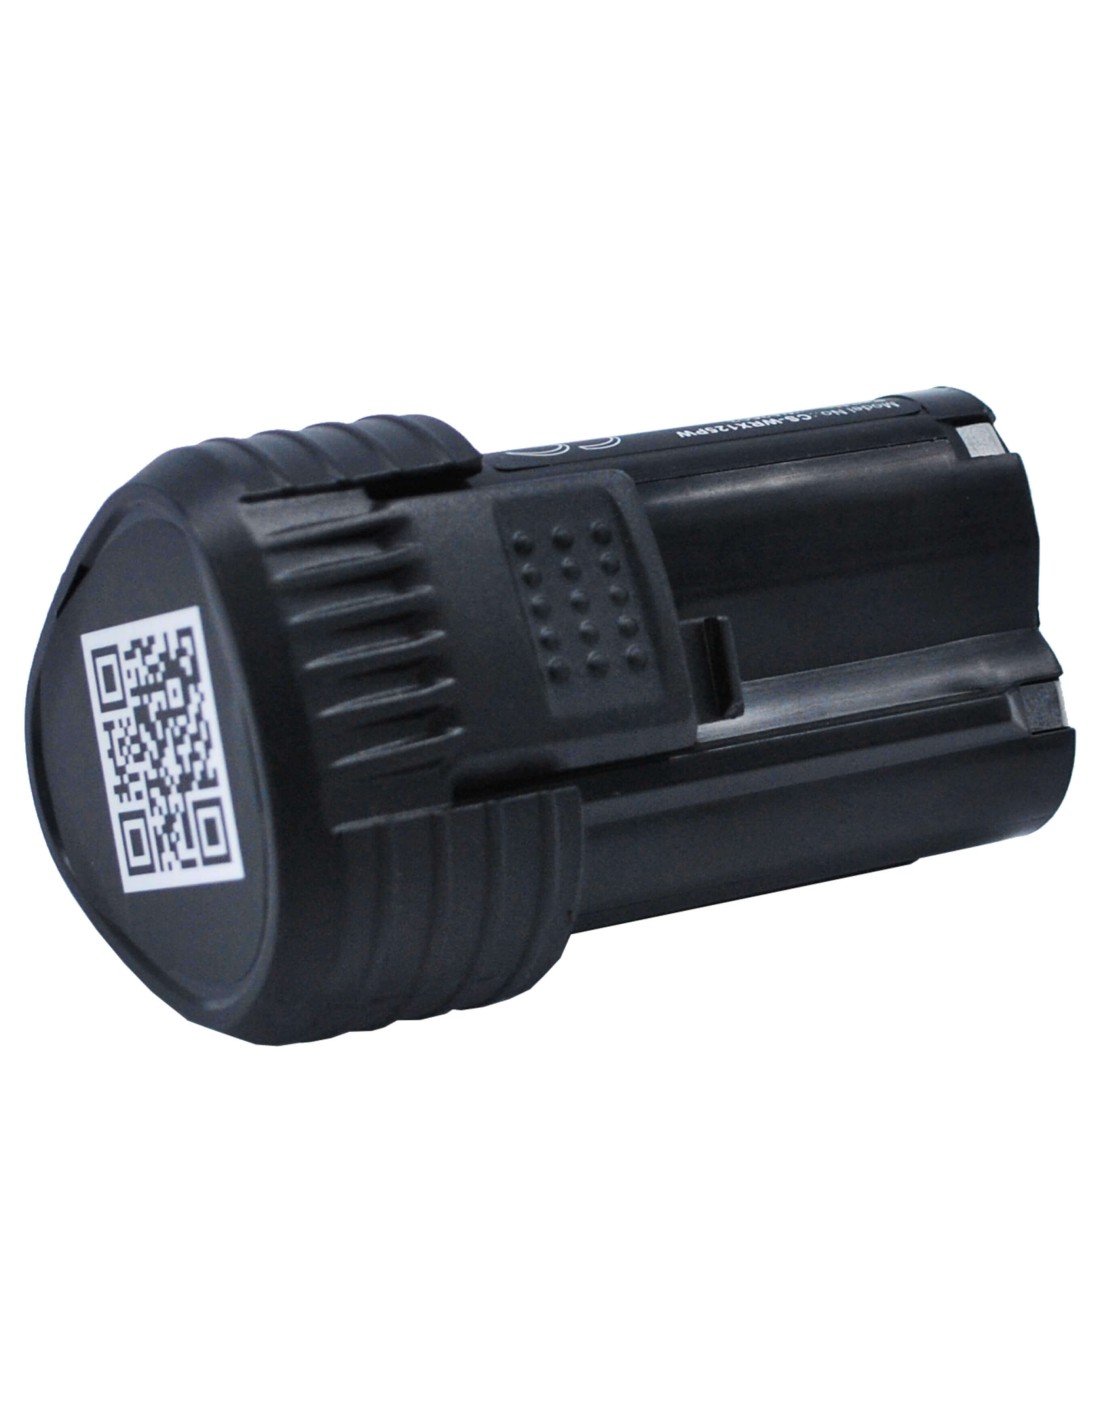 Battery for Worx Wu288, Wx125, Wx125.1 12V, 1500mAh - 18.00Wh